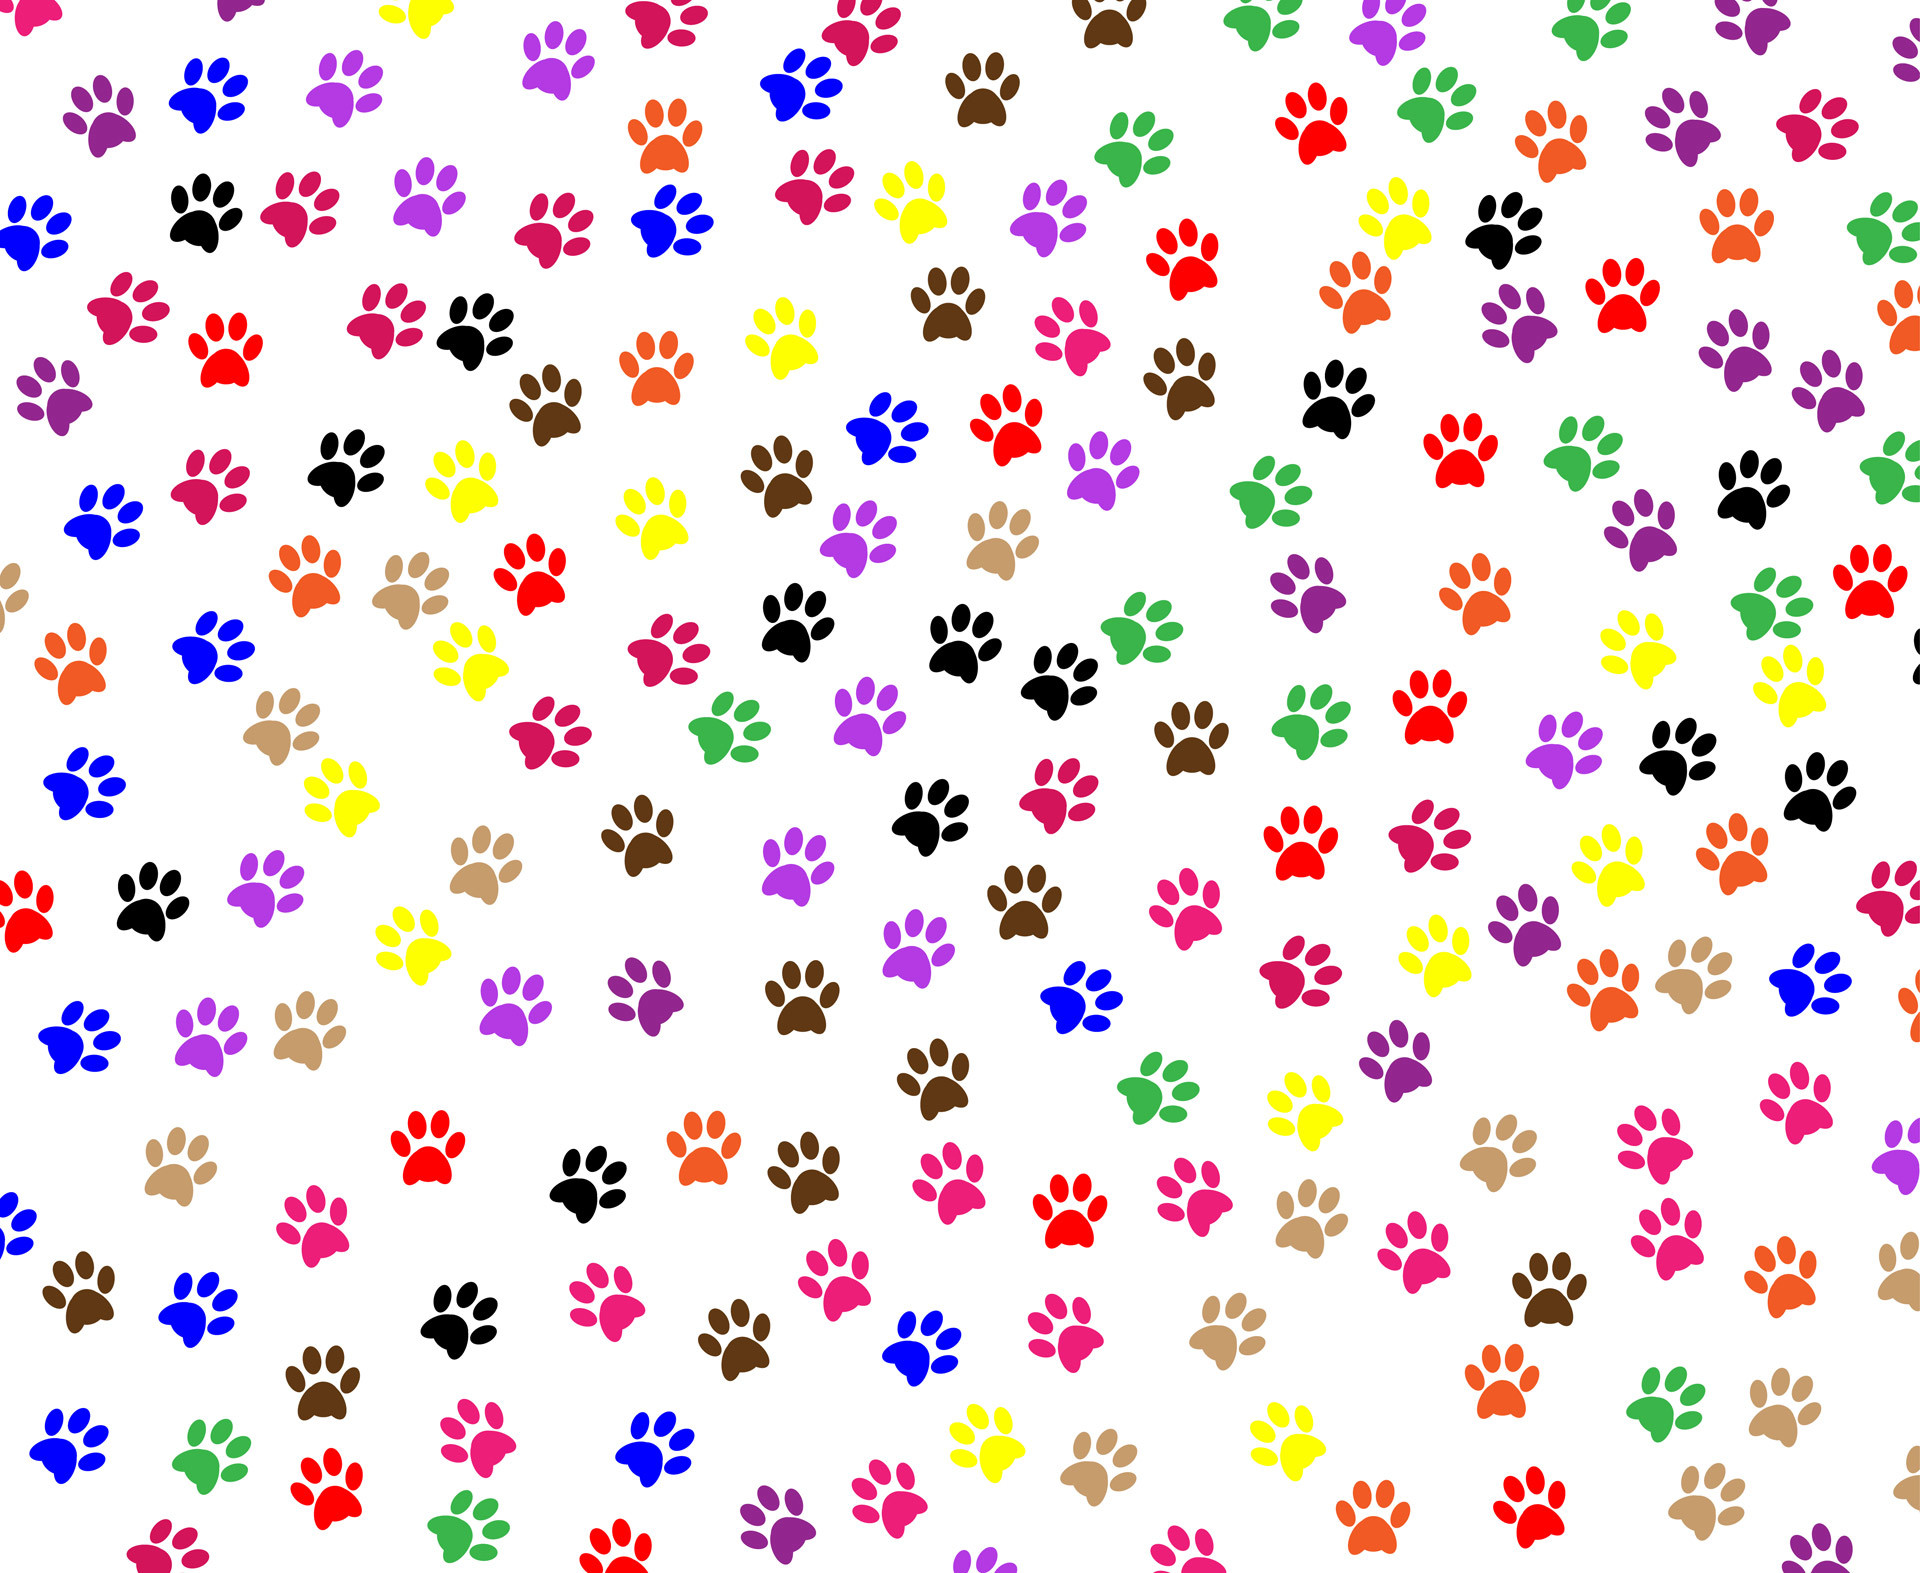 Paw Print Wallpaper (38+ pictures)